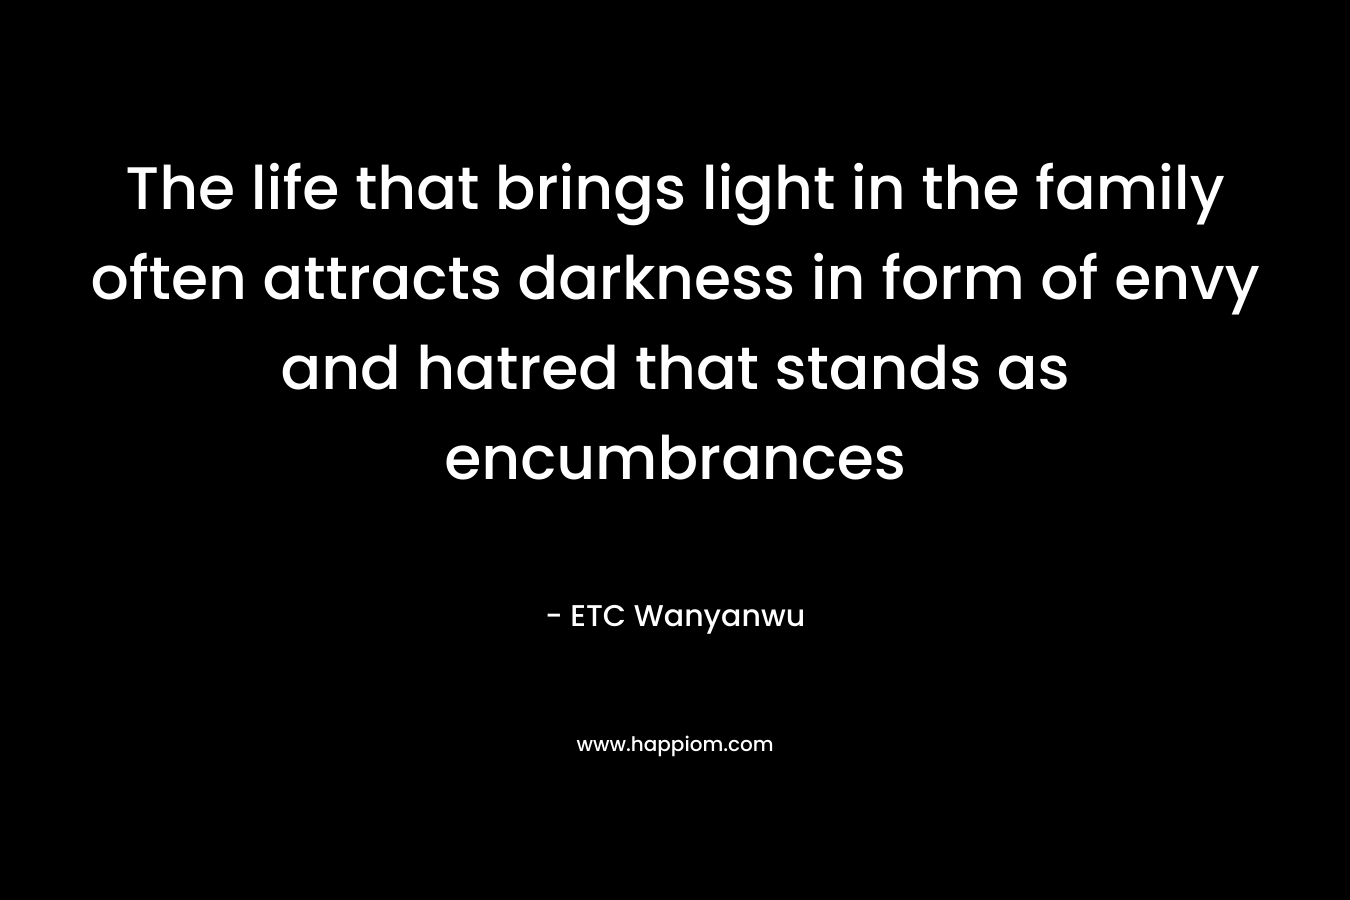 The life that brings light in the family often attracts darkness in form of envy and hatred that stands as encumbrances – ETC Wanyanwu